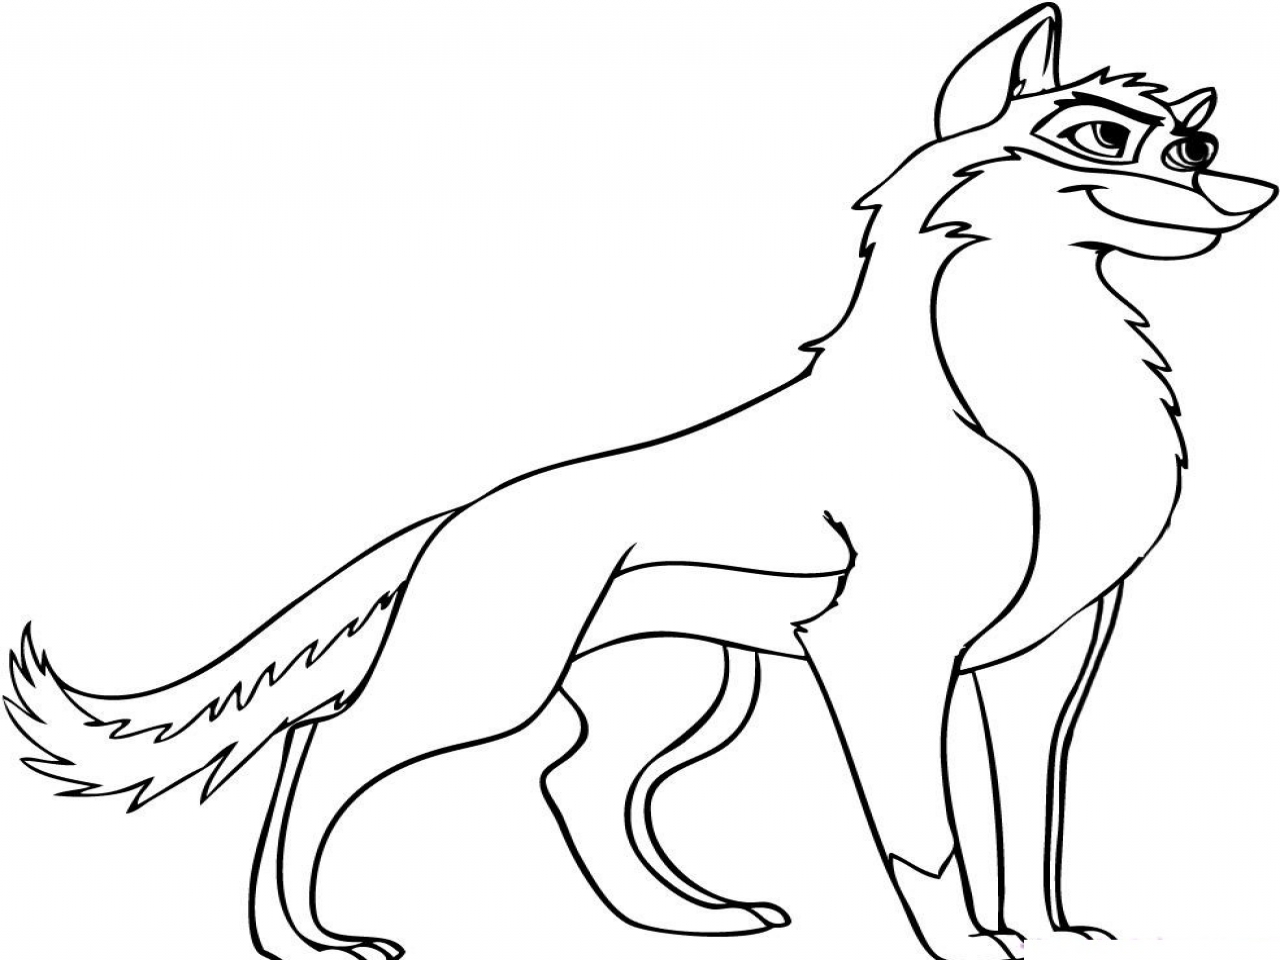 Anime Wolves Coloring Pages / Wolves Coloring Pages Anime Wolf Drawing